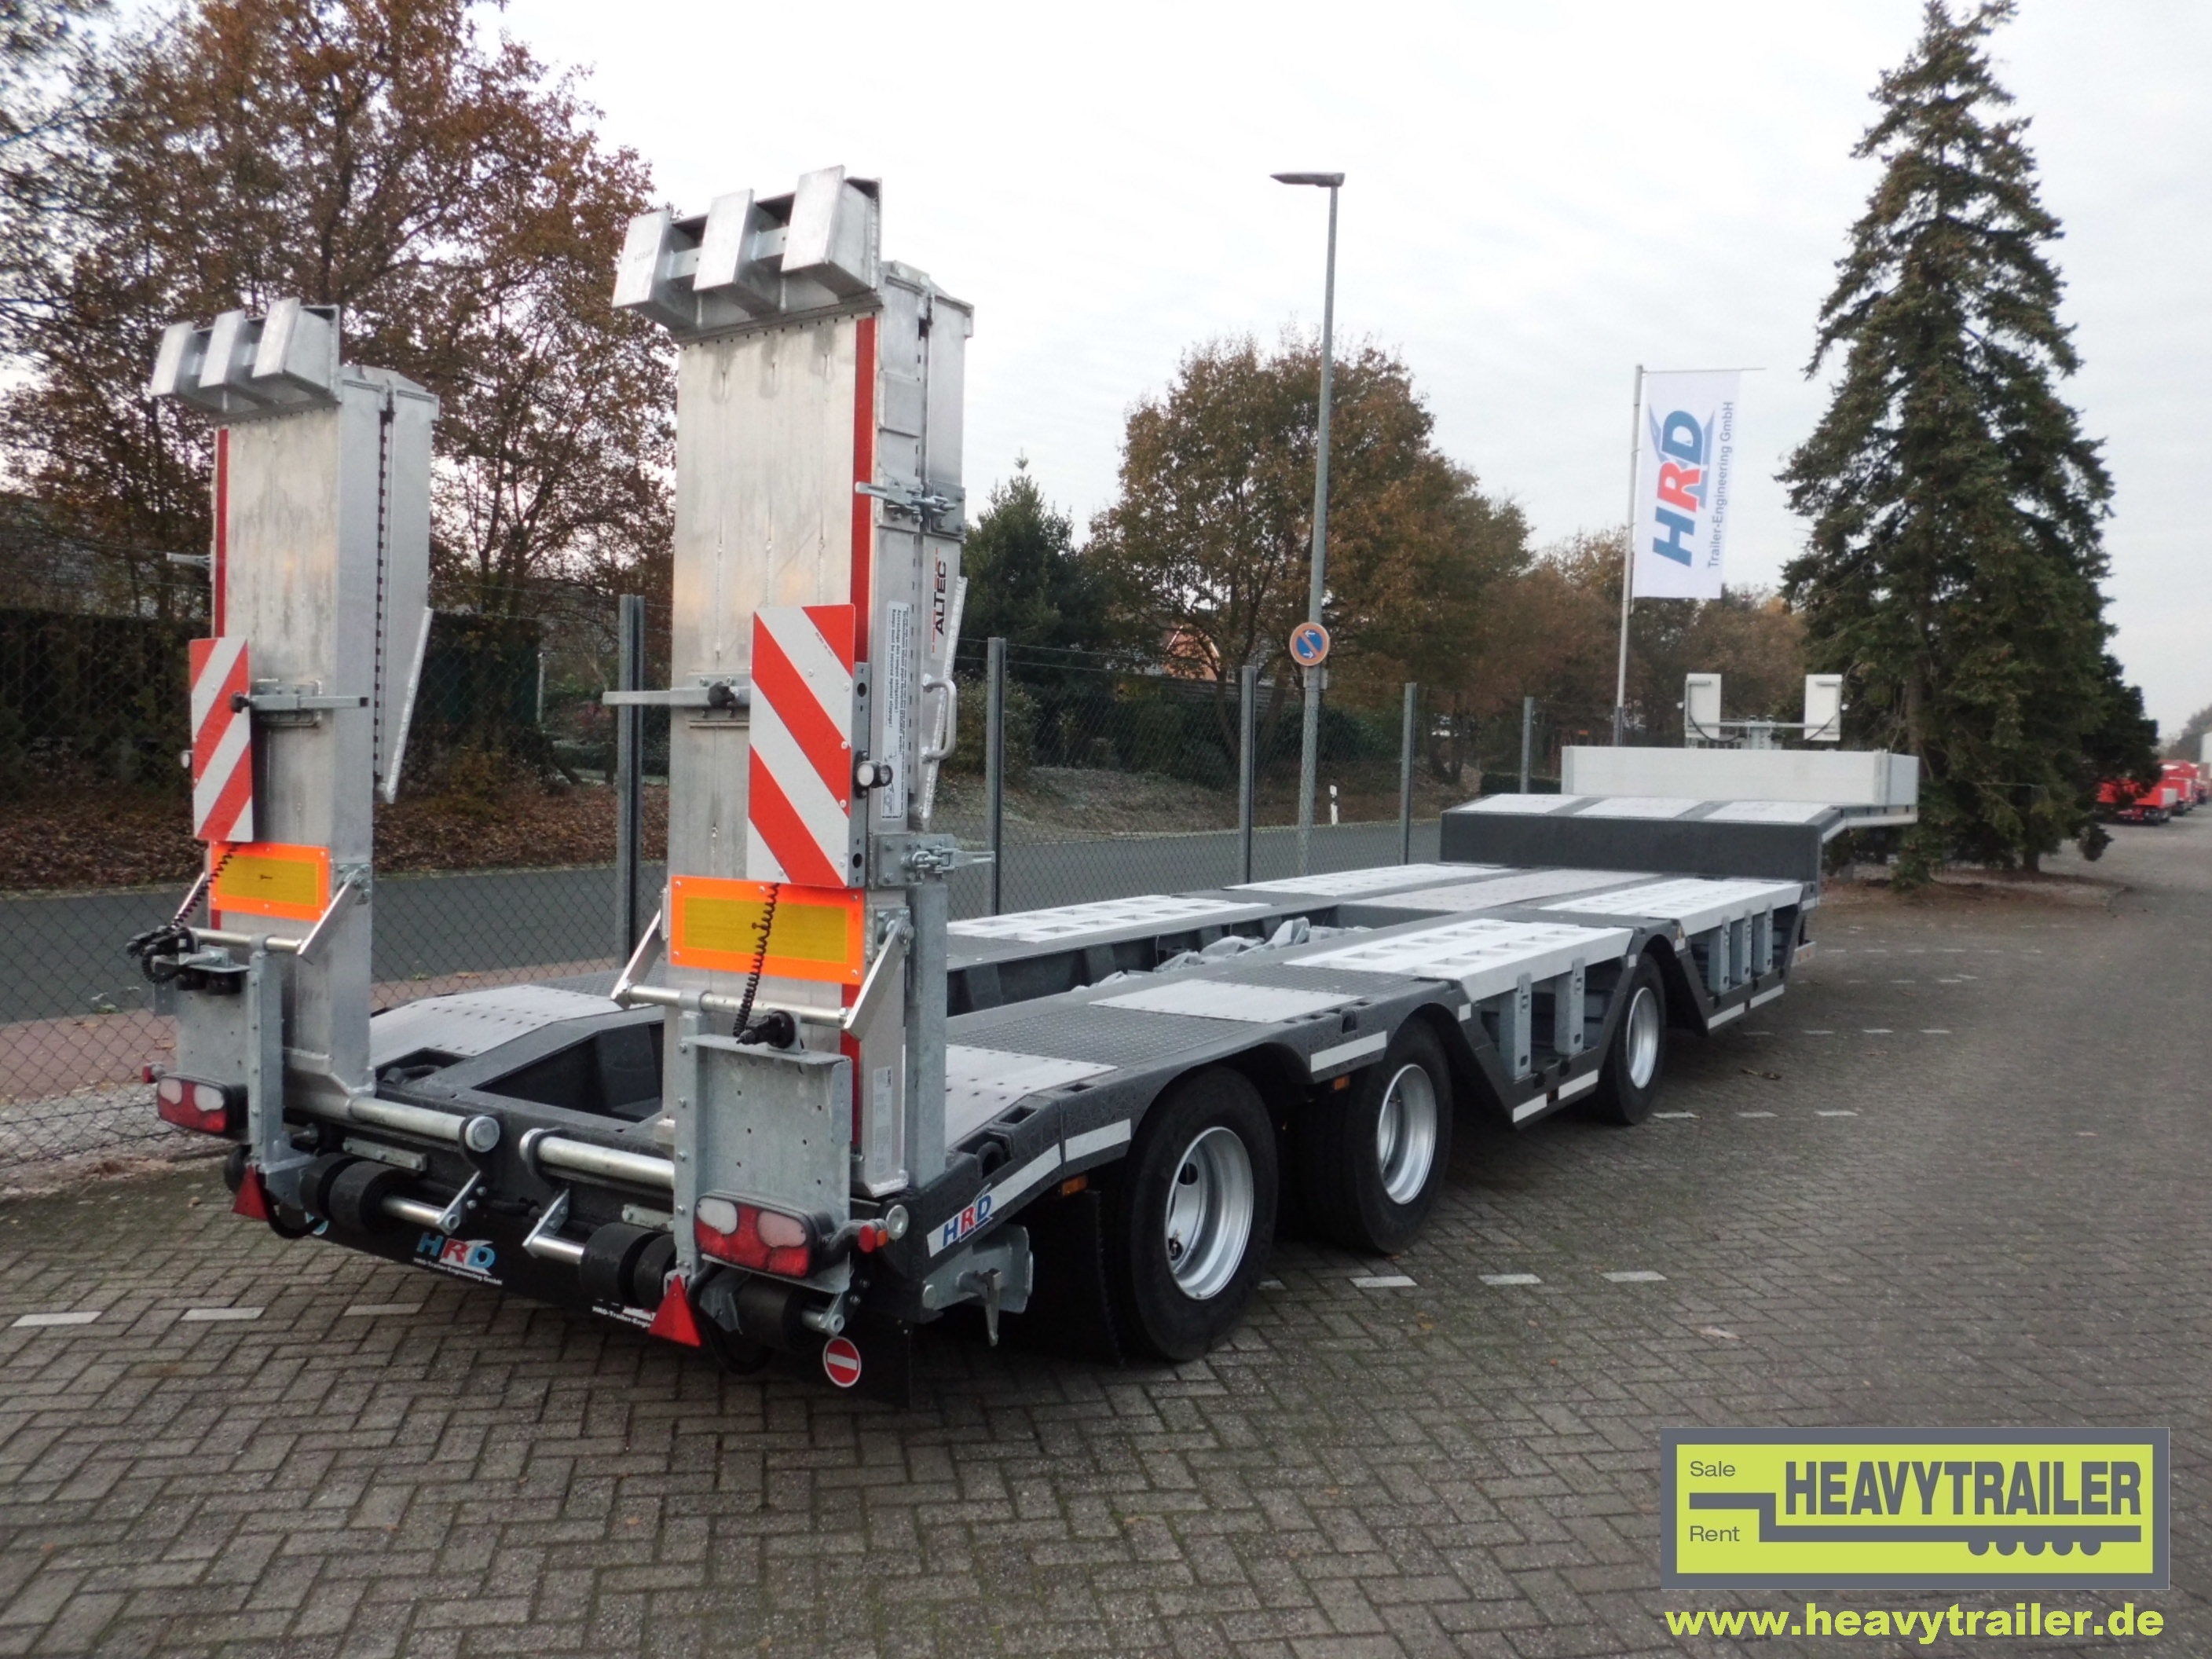 HRD 3-axle-low-bed-trailer with wheel recess and ramps